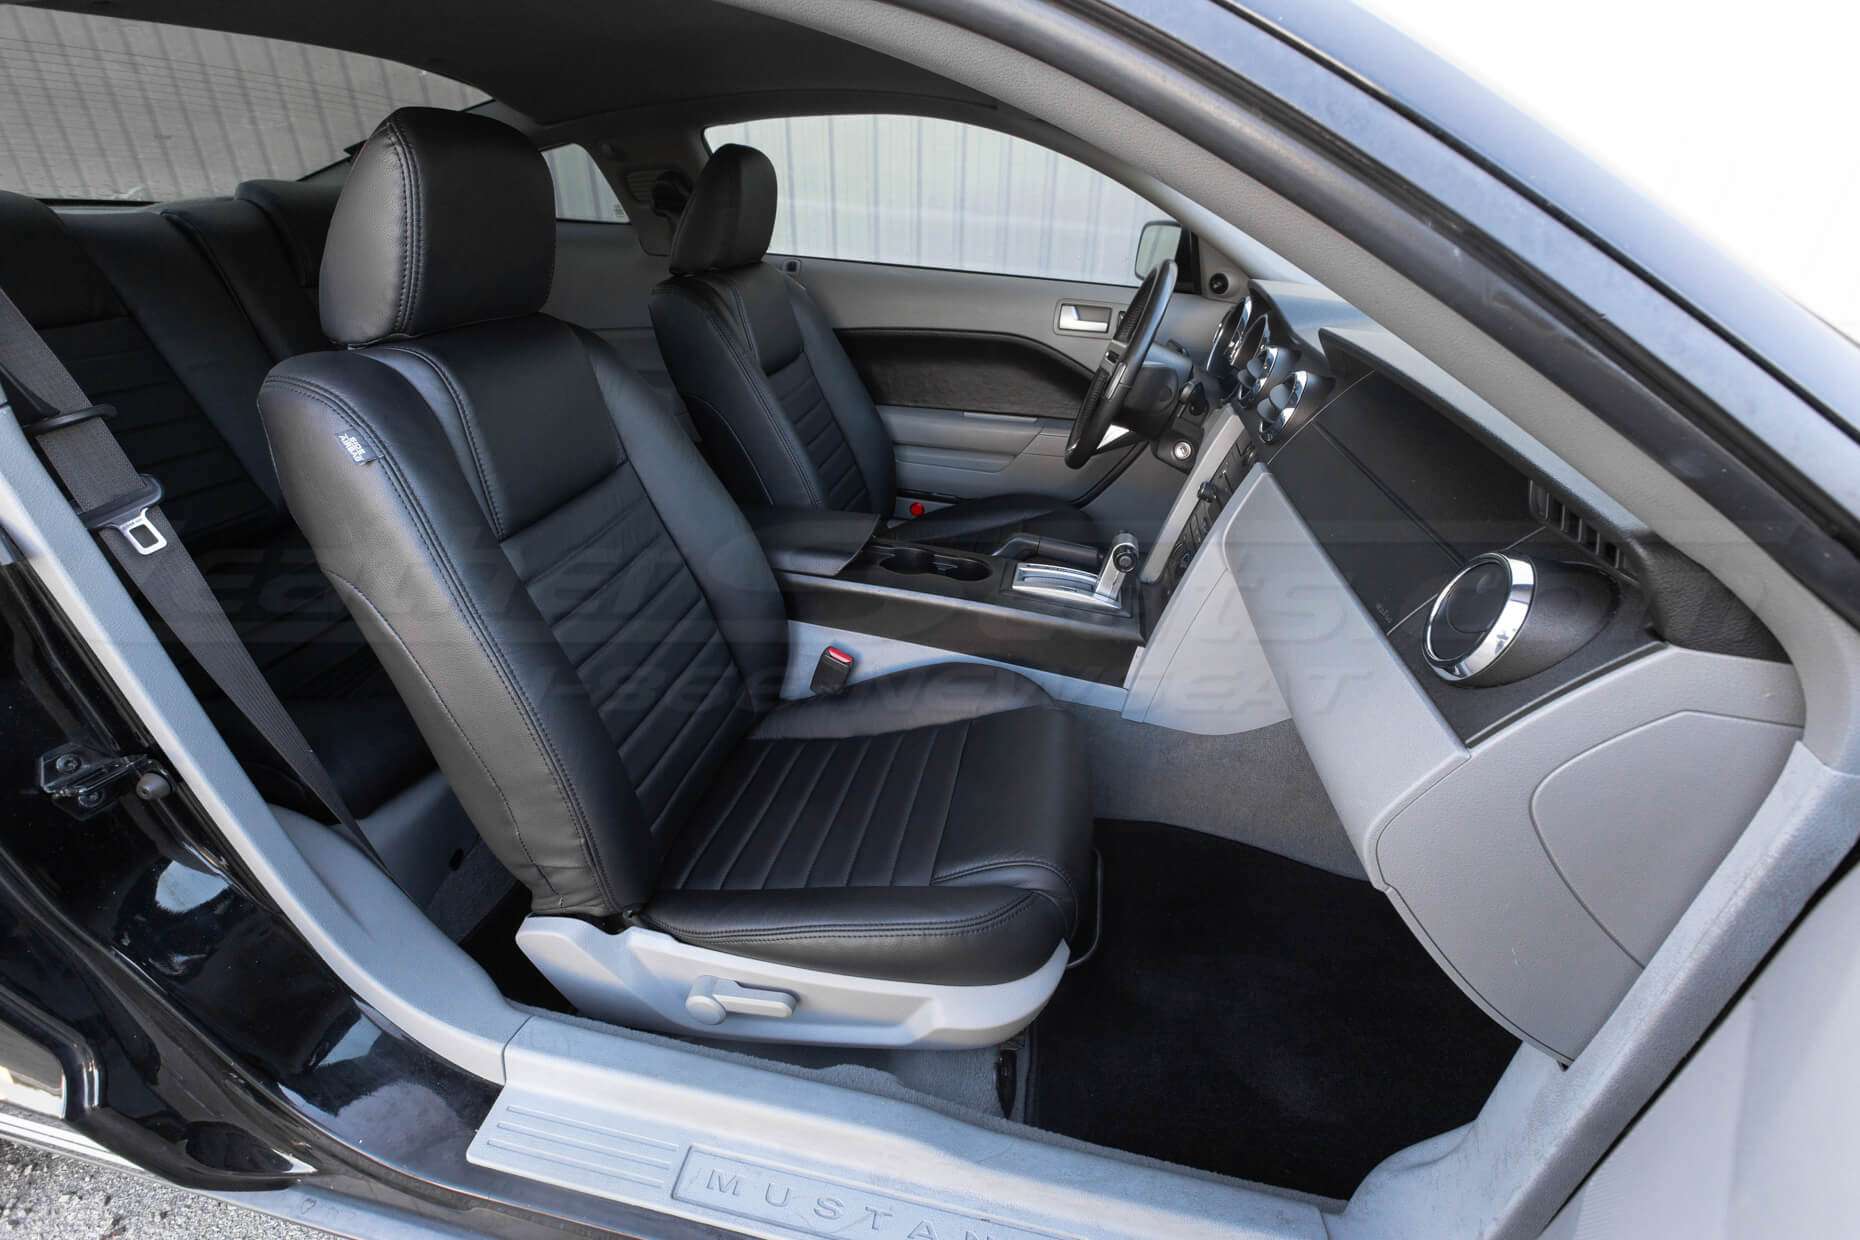 2005-2009 Ford Mustang Leather Seats - Black - Front interior - Passenger side view with wide angle